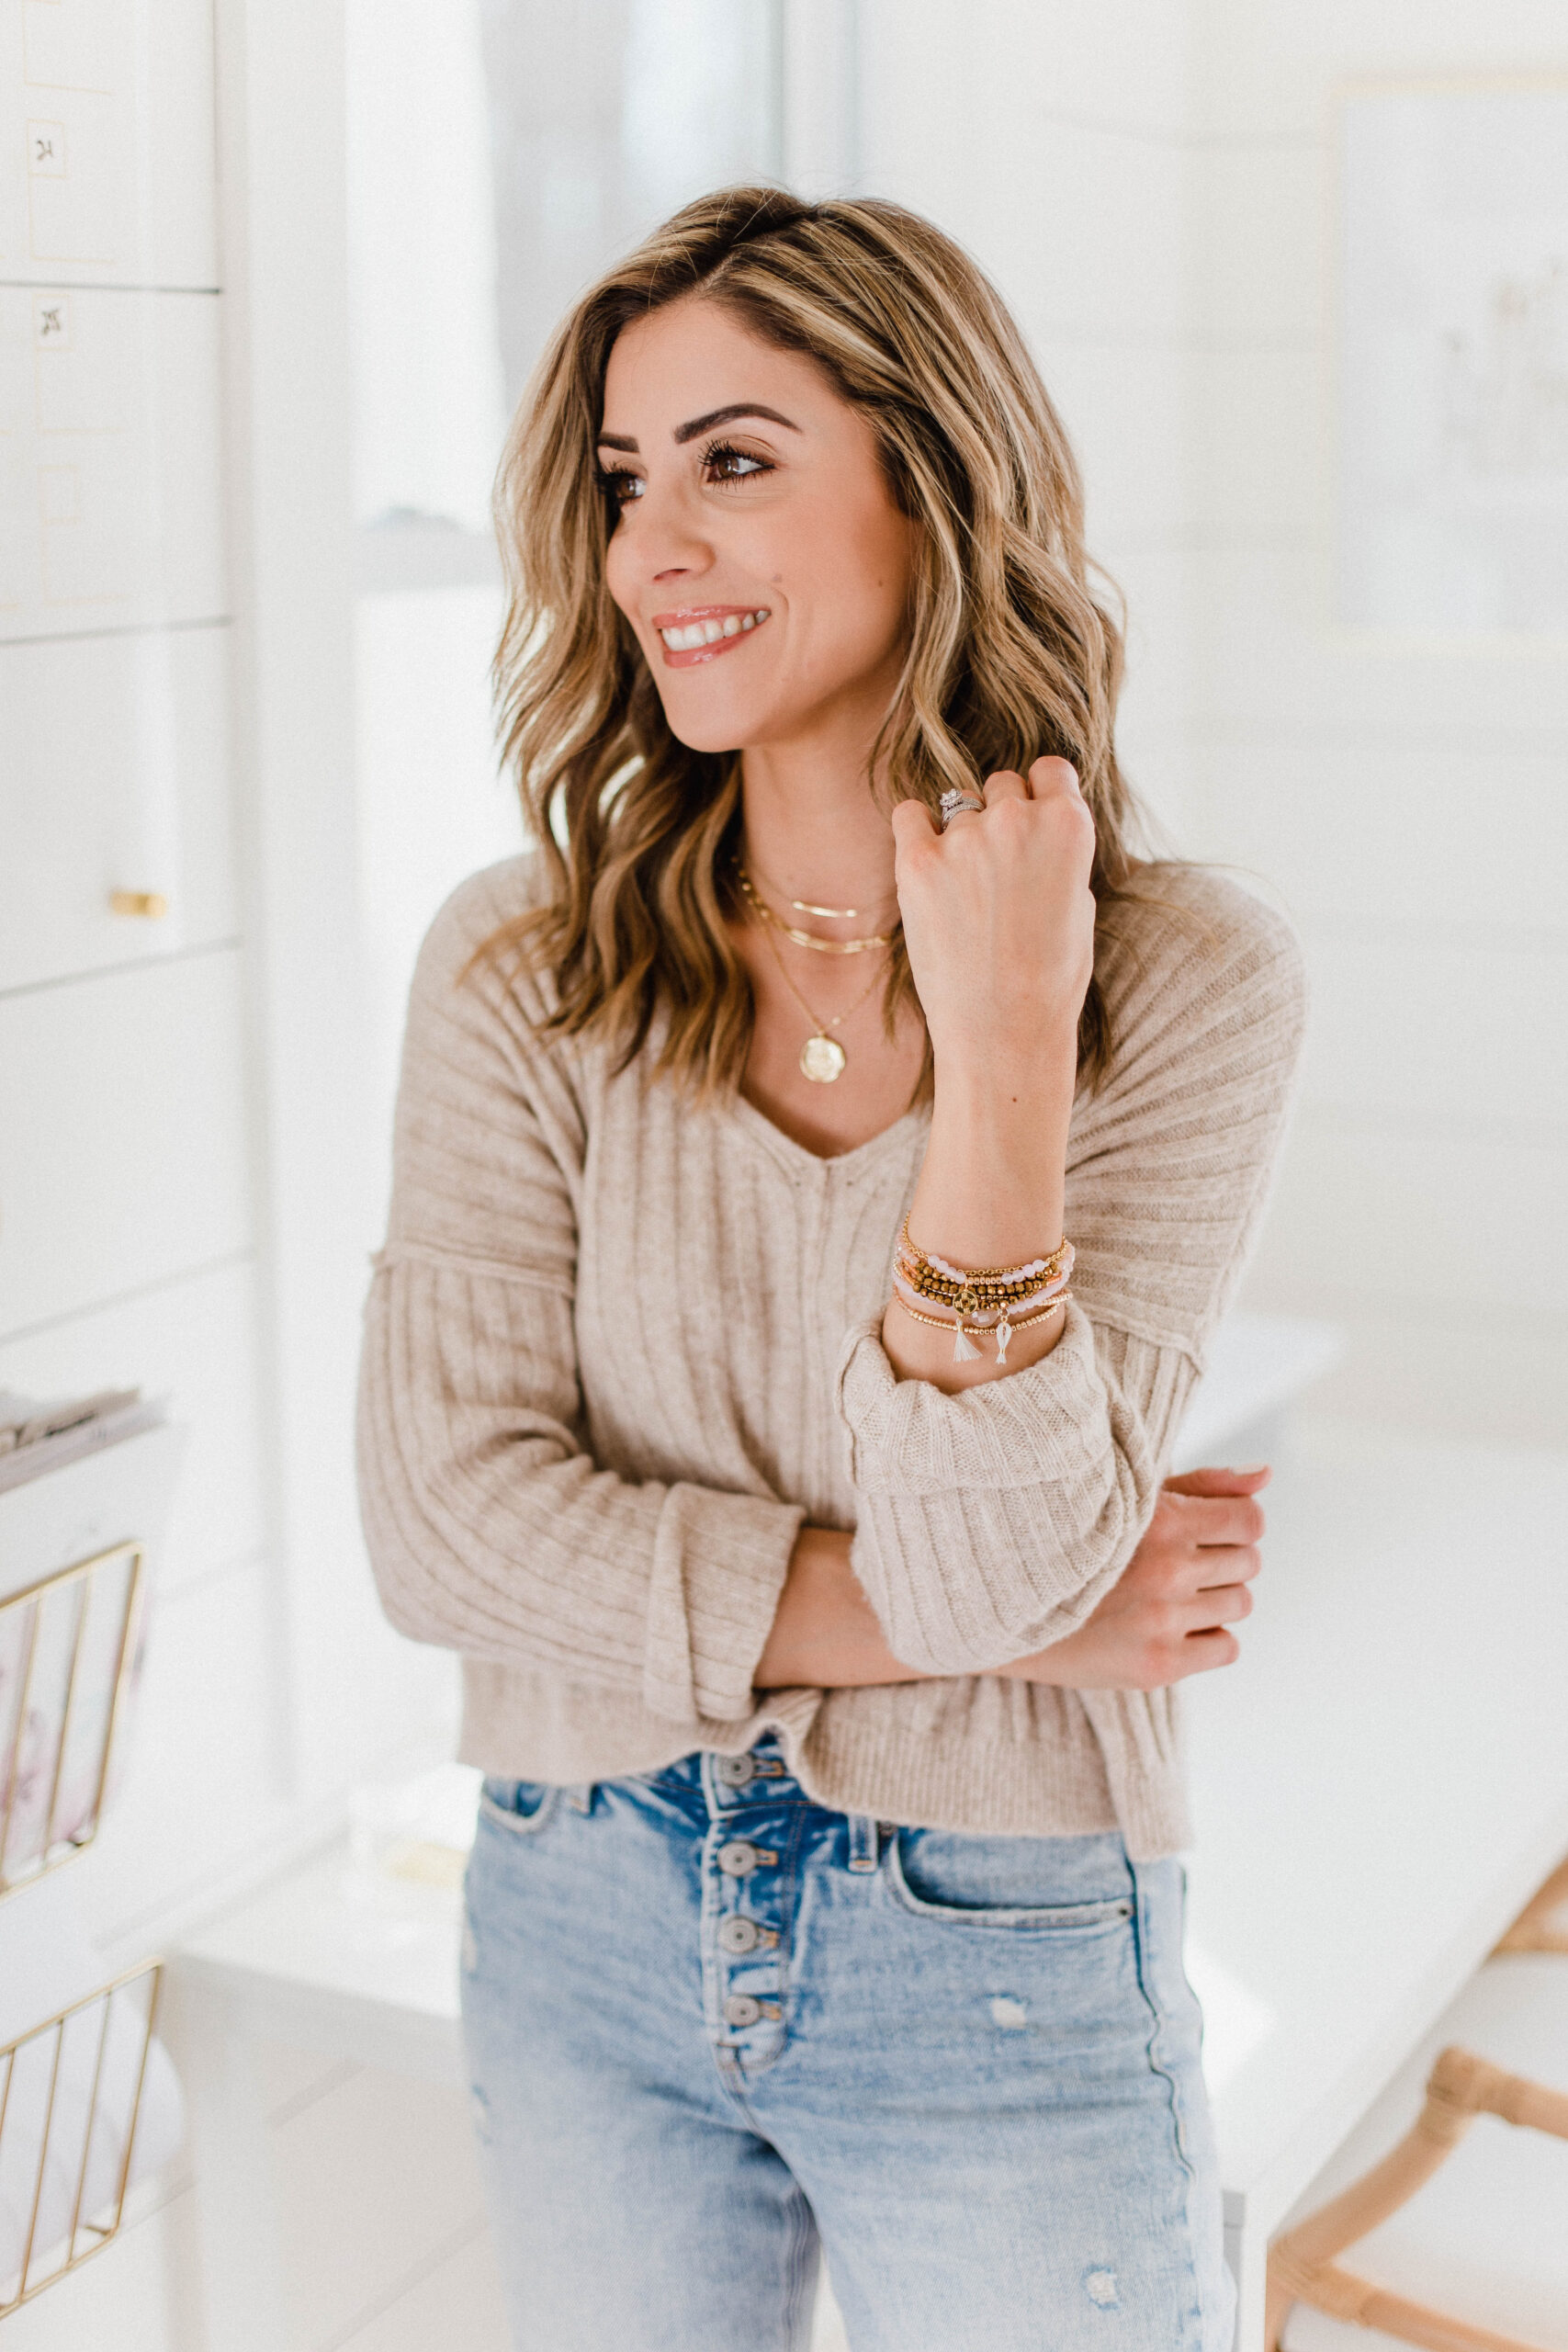 Connecticut life and style blogger Lauren McBride shares her Victoria Emerson St. Patrick's Day sale picks, including boho cuffs, wraps, and more.